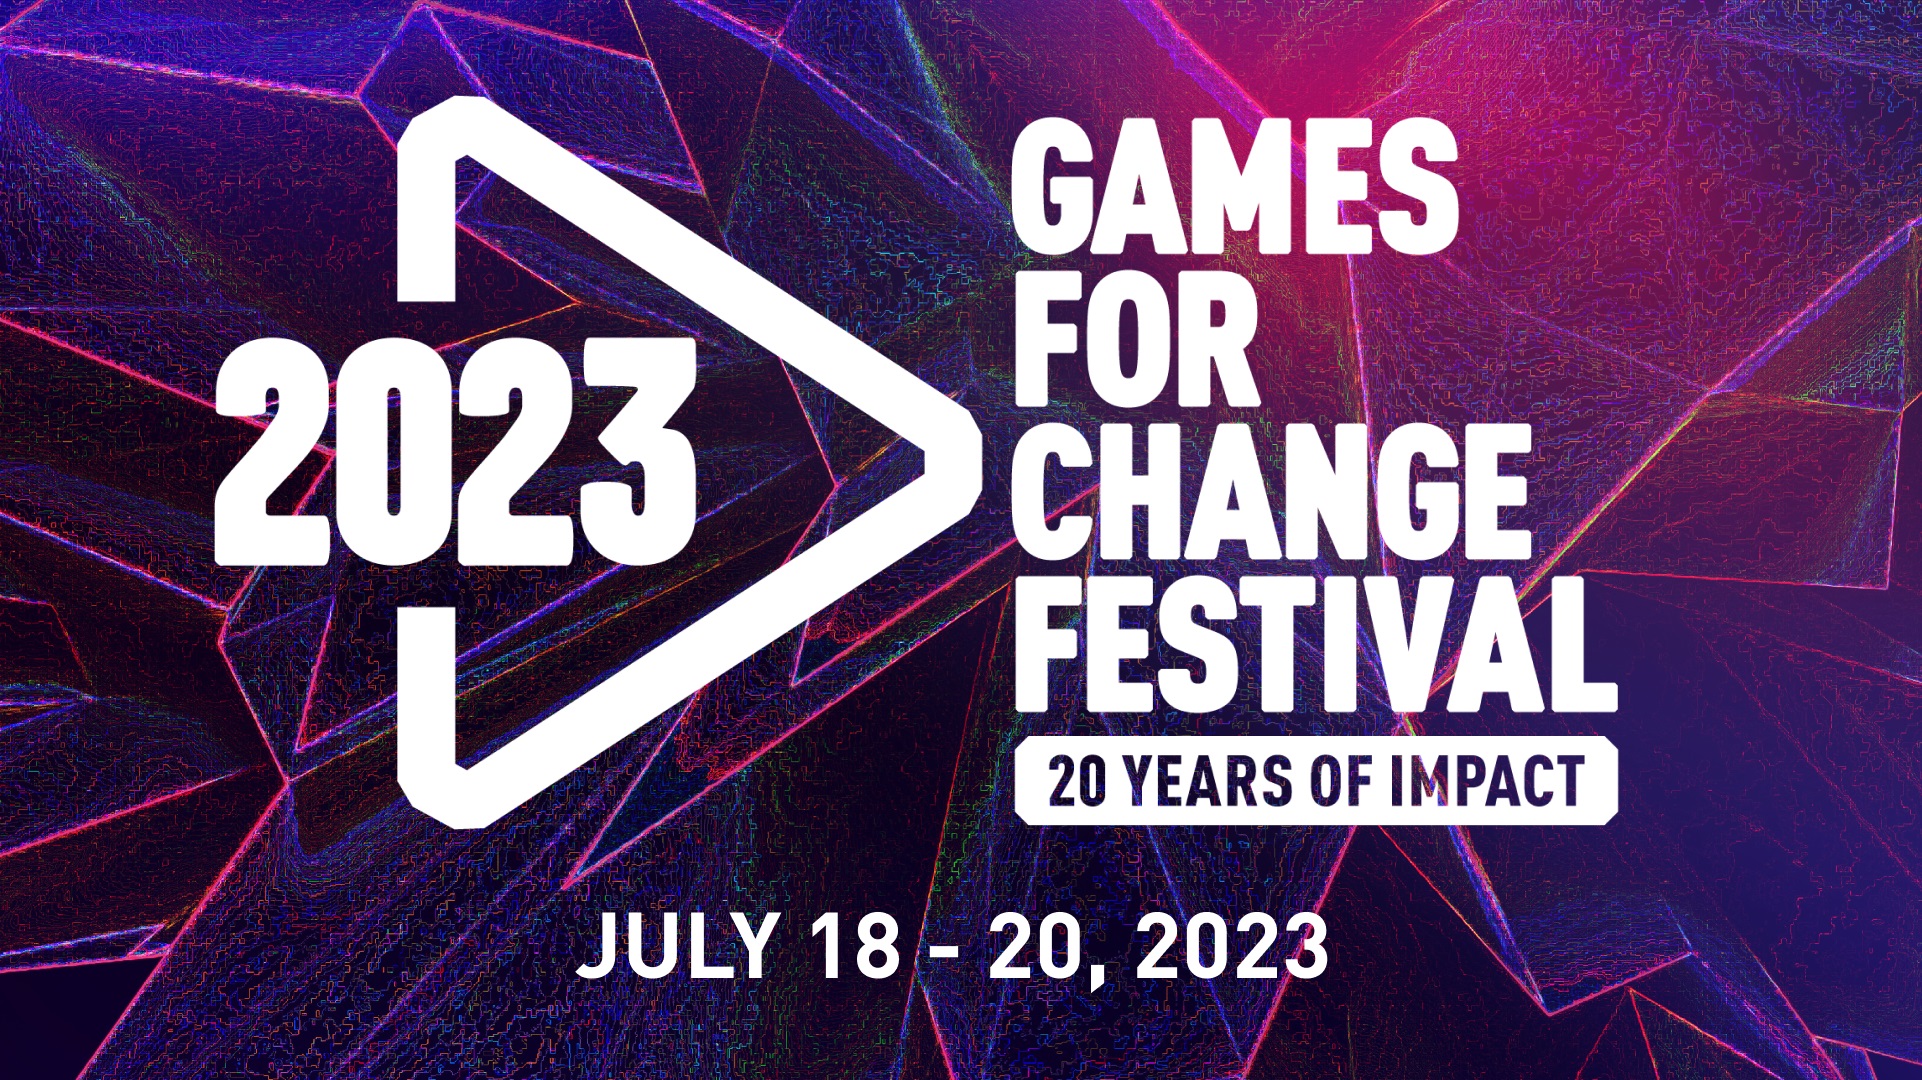 Games for Change Festival will explore the metaverse, AI, education, and more